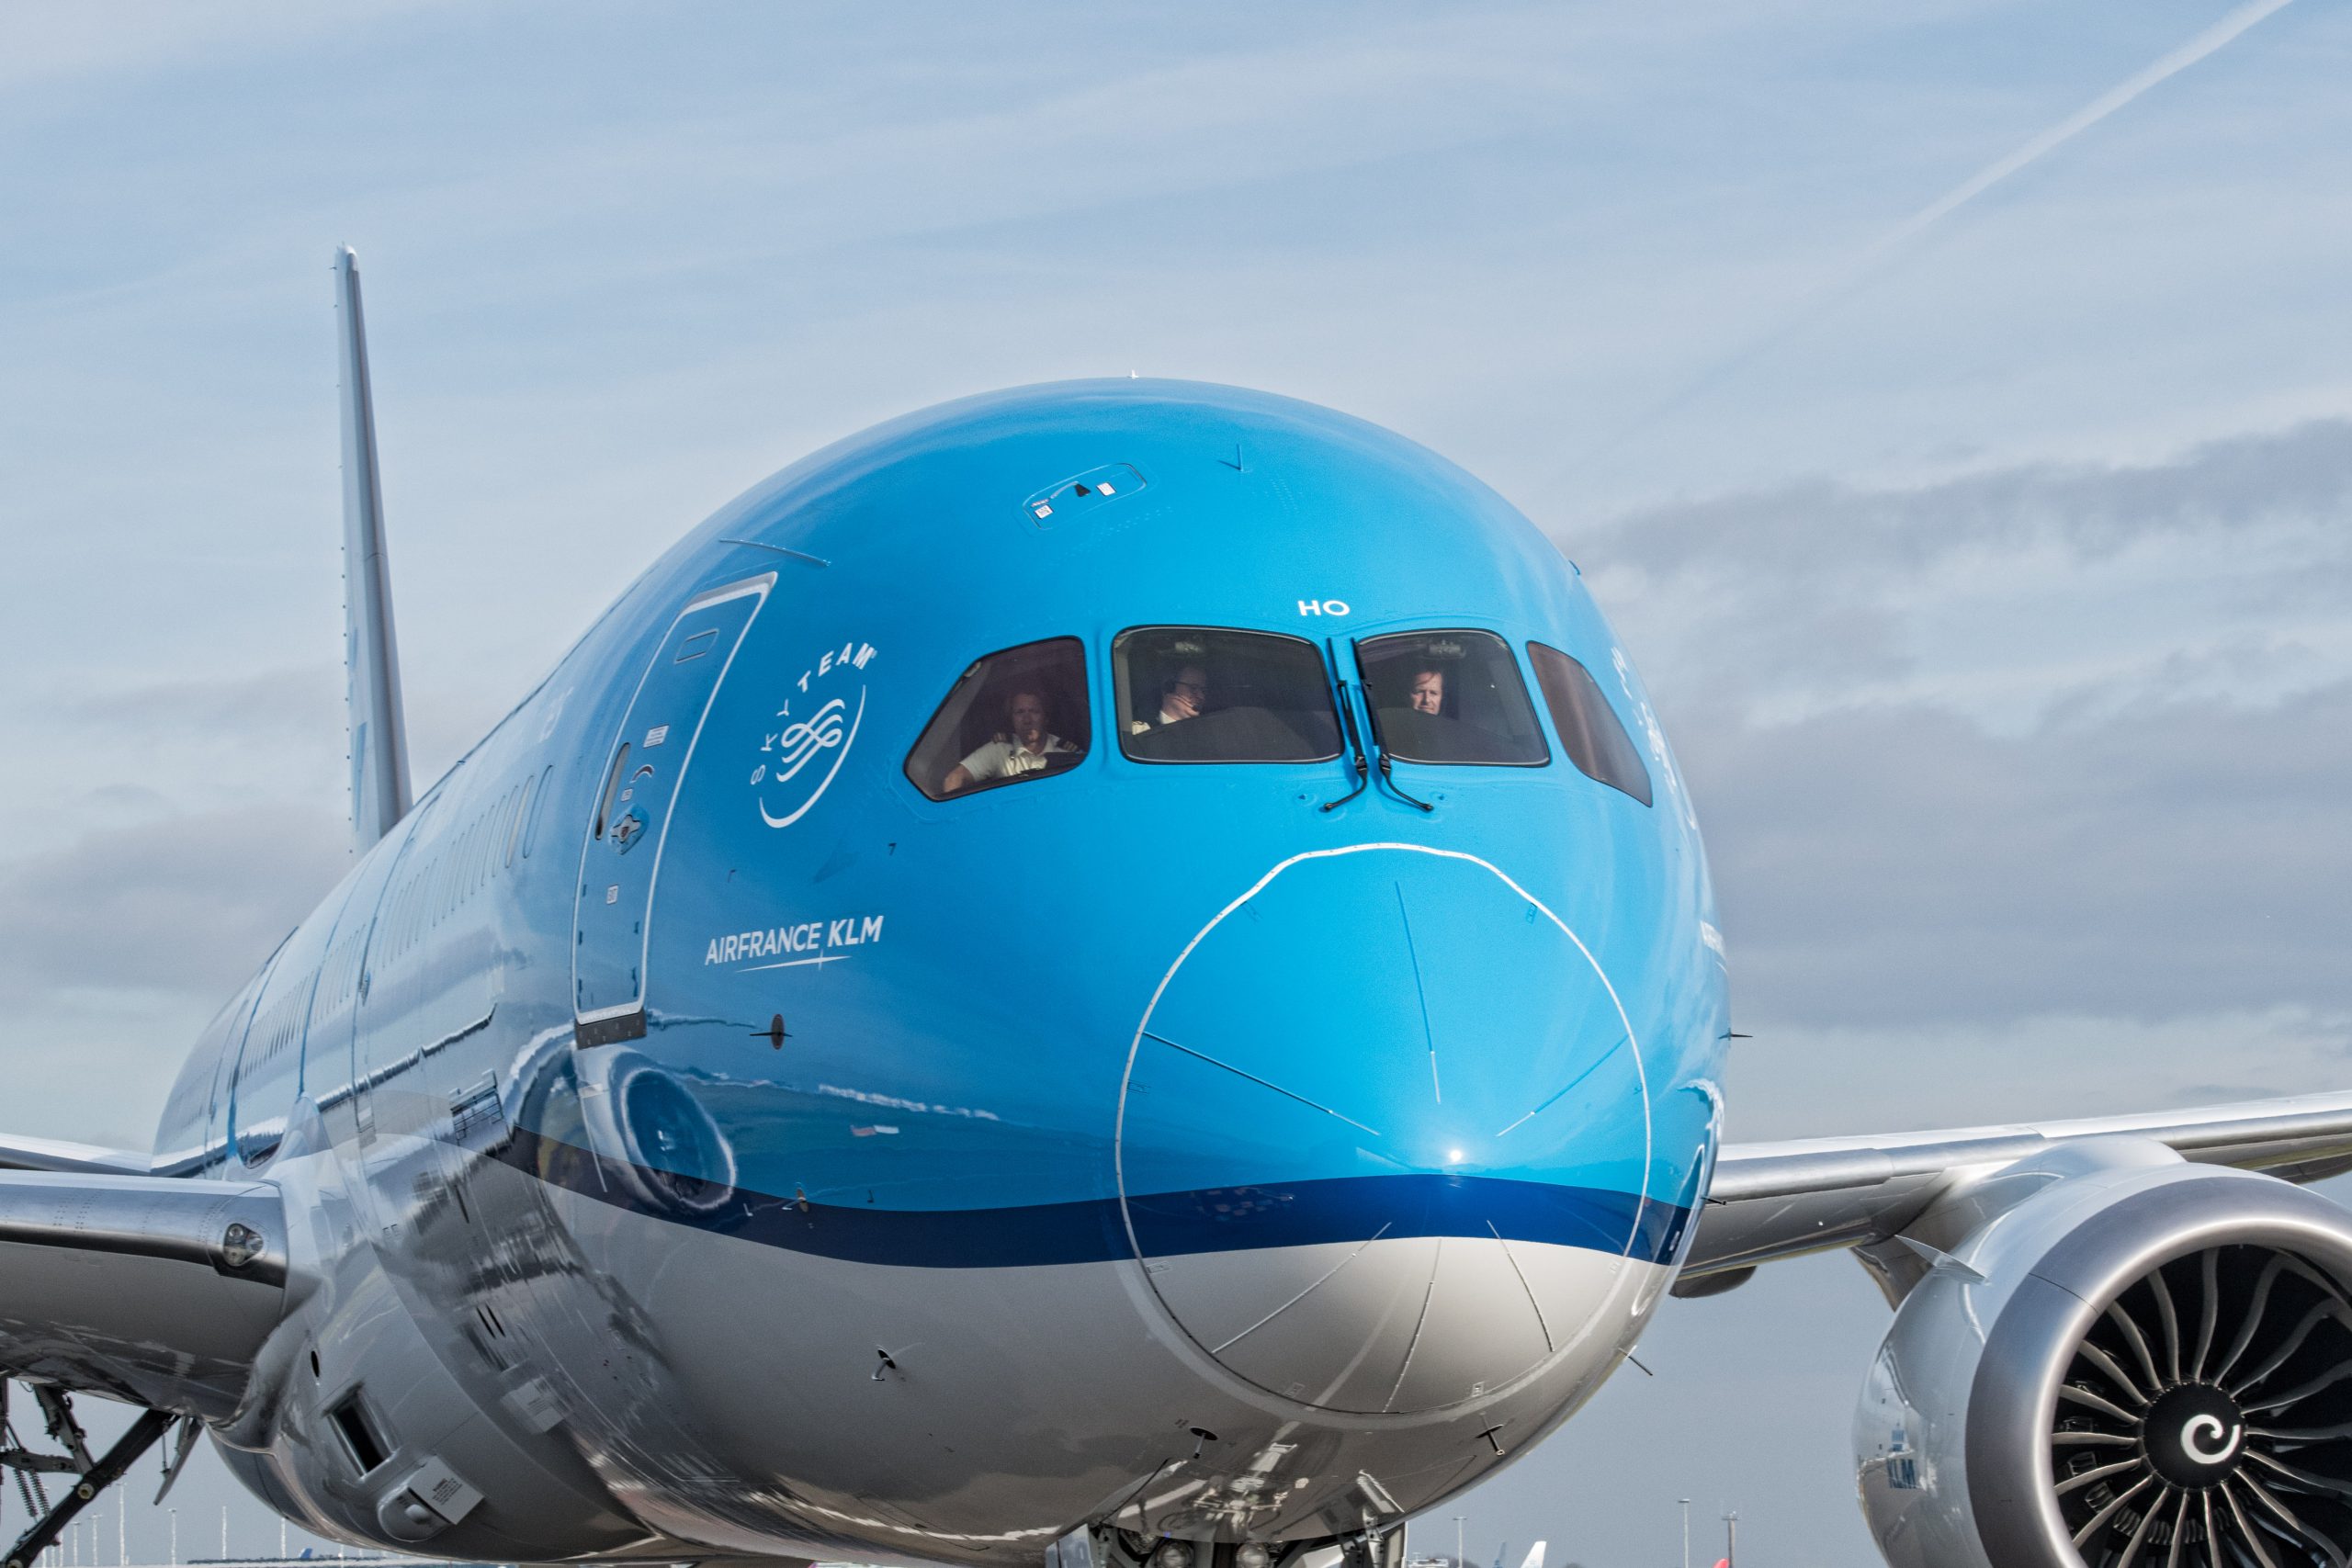 Pieter Elbers to step down as the CEO of KLM